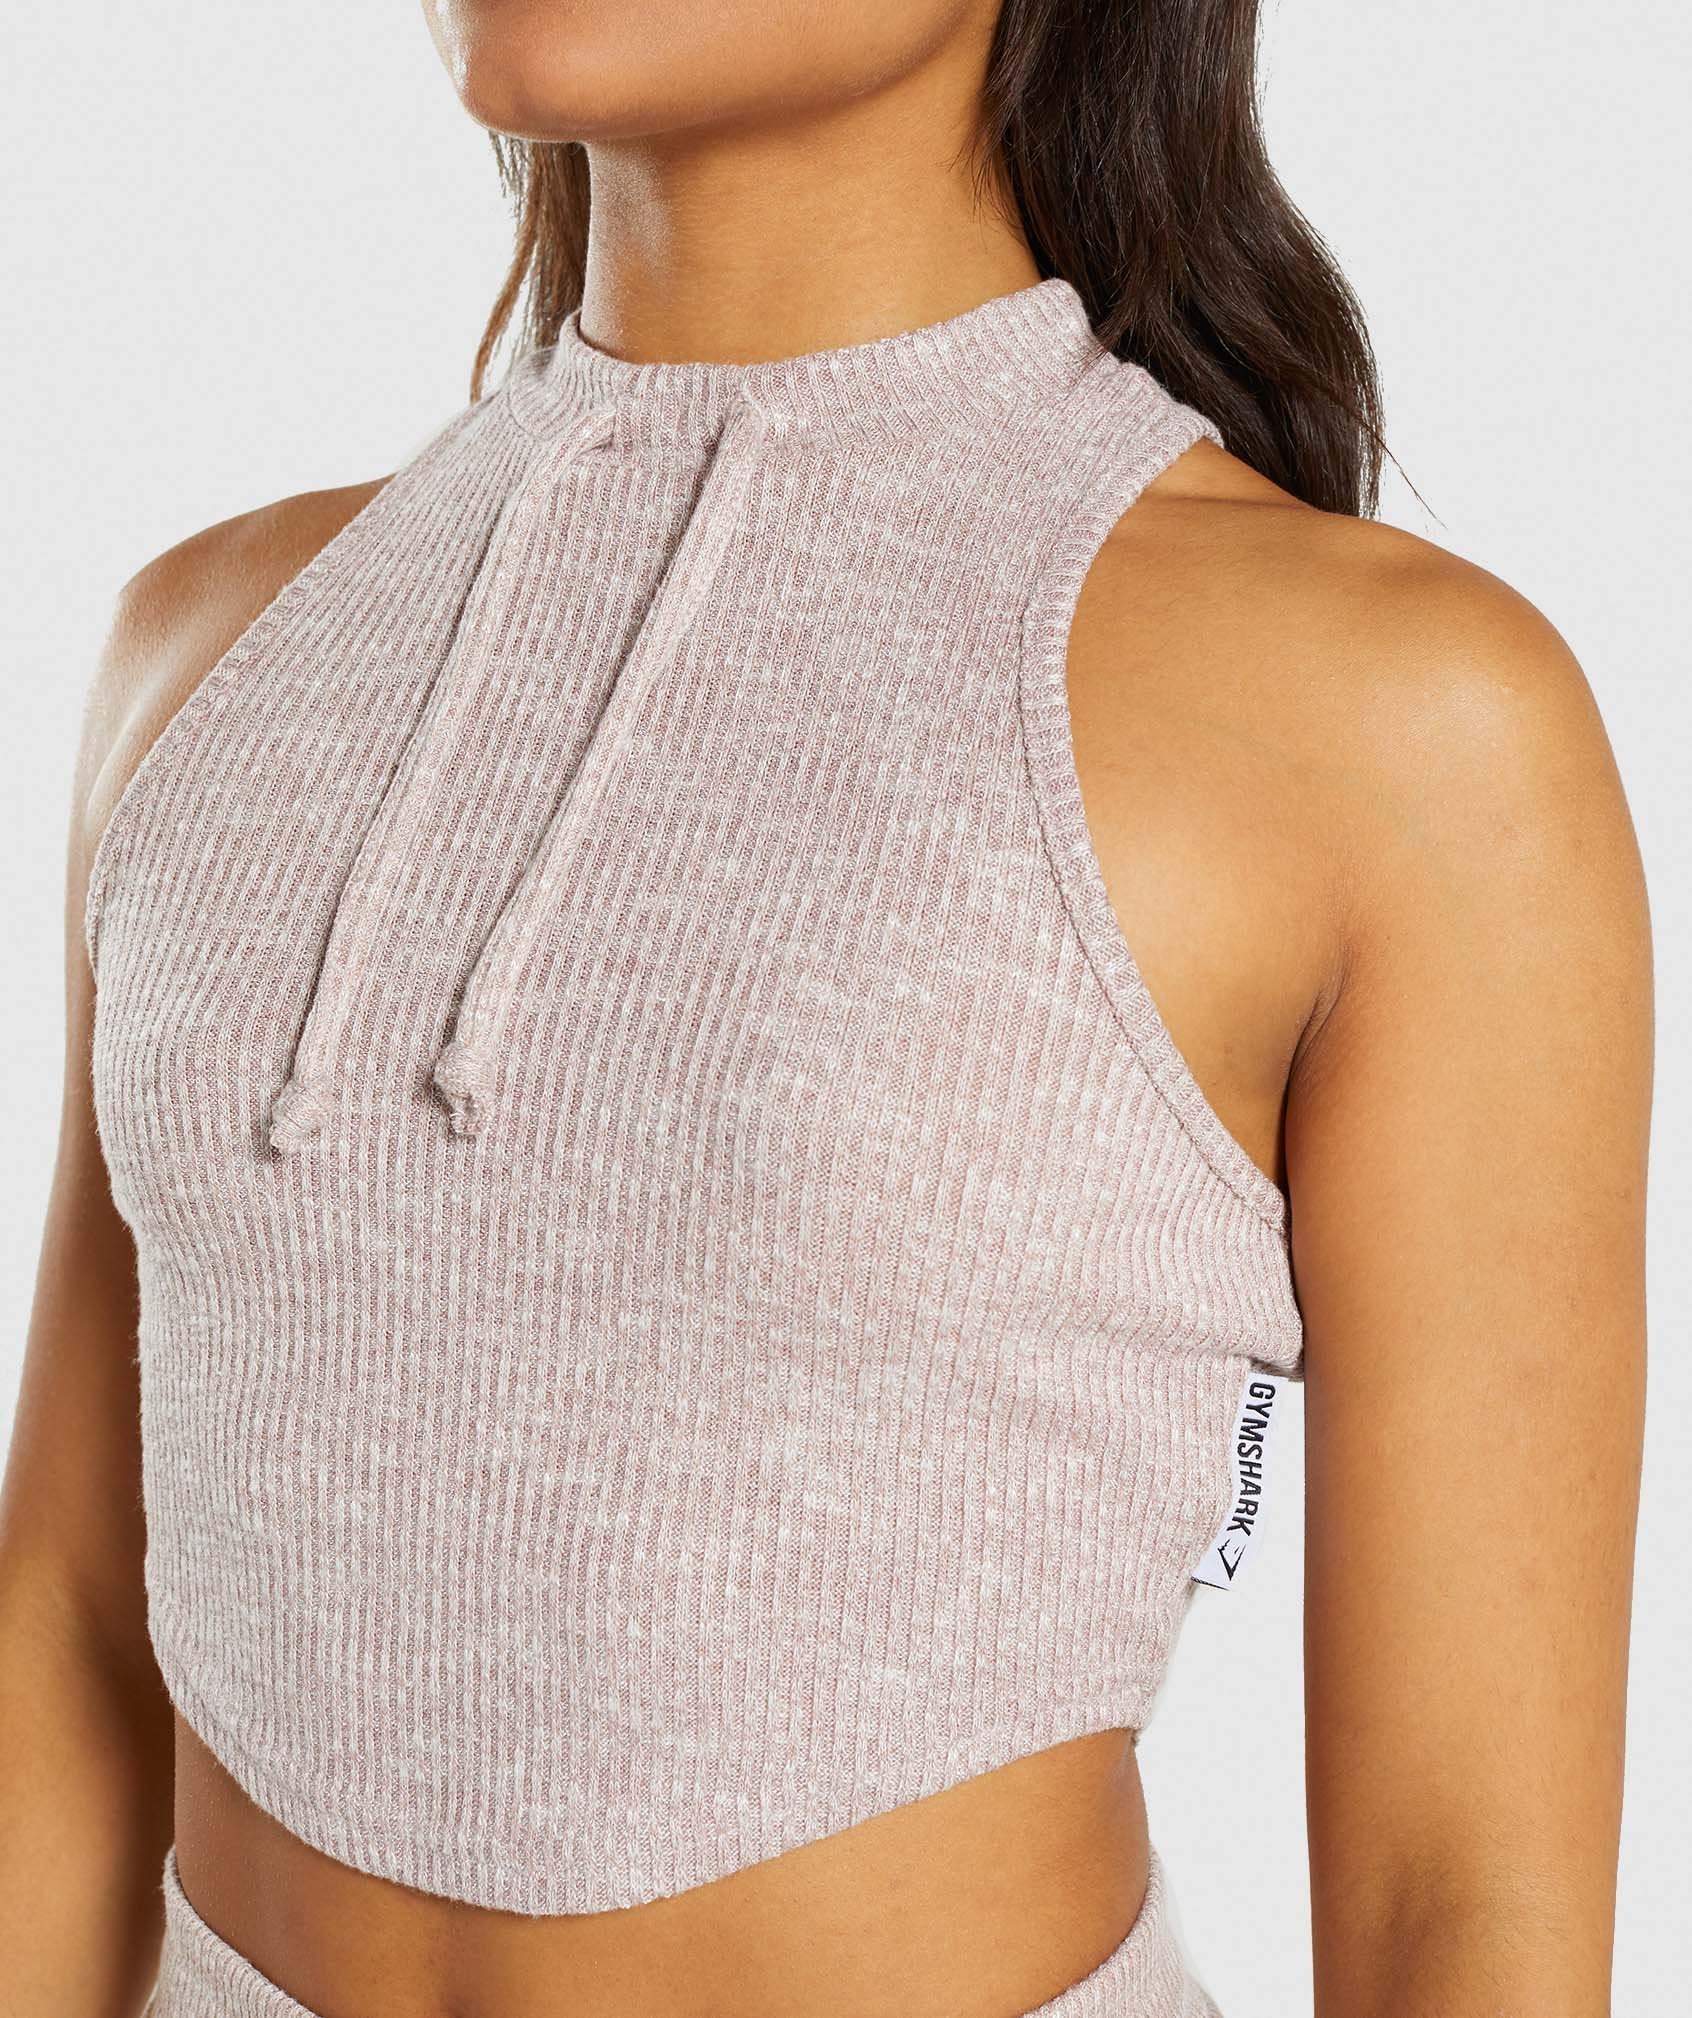 Slounge Crop Top in Taupe Marl - view 5